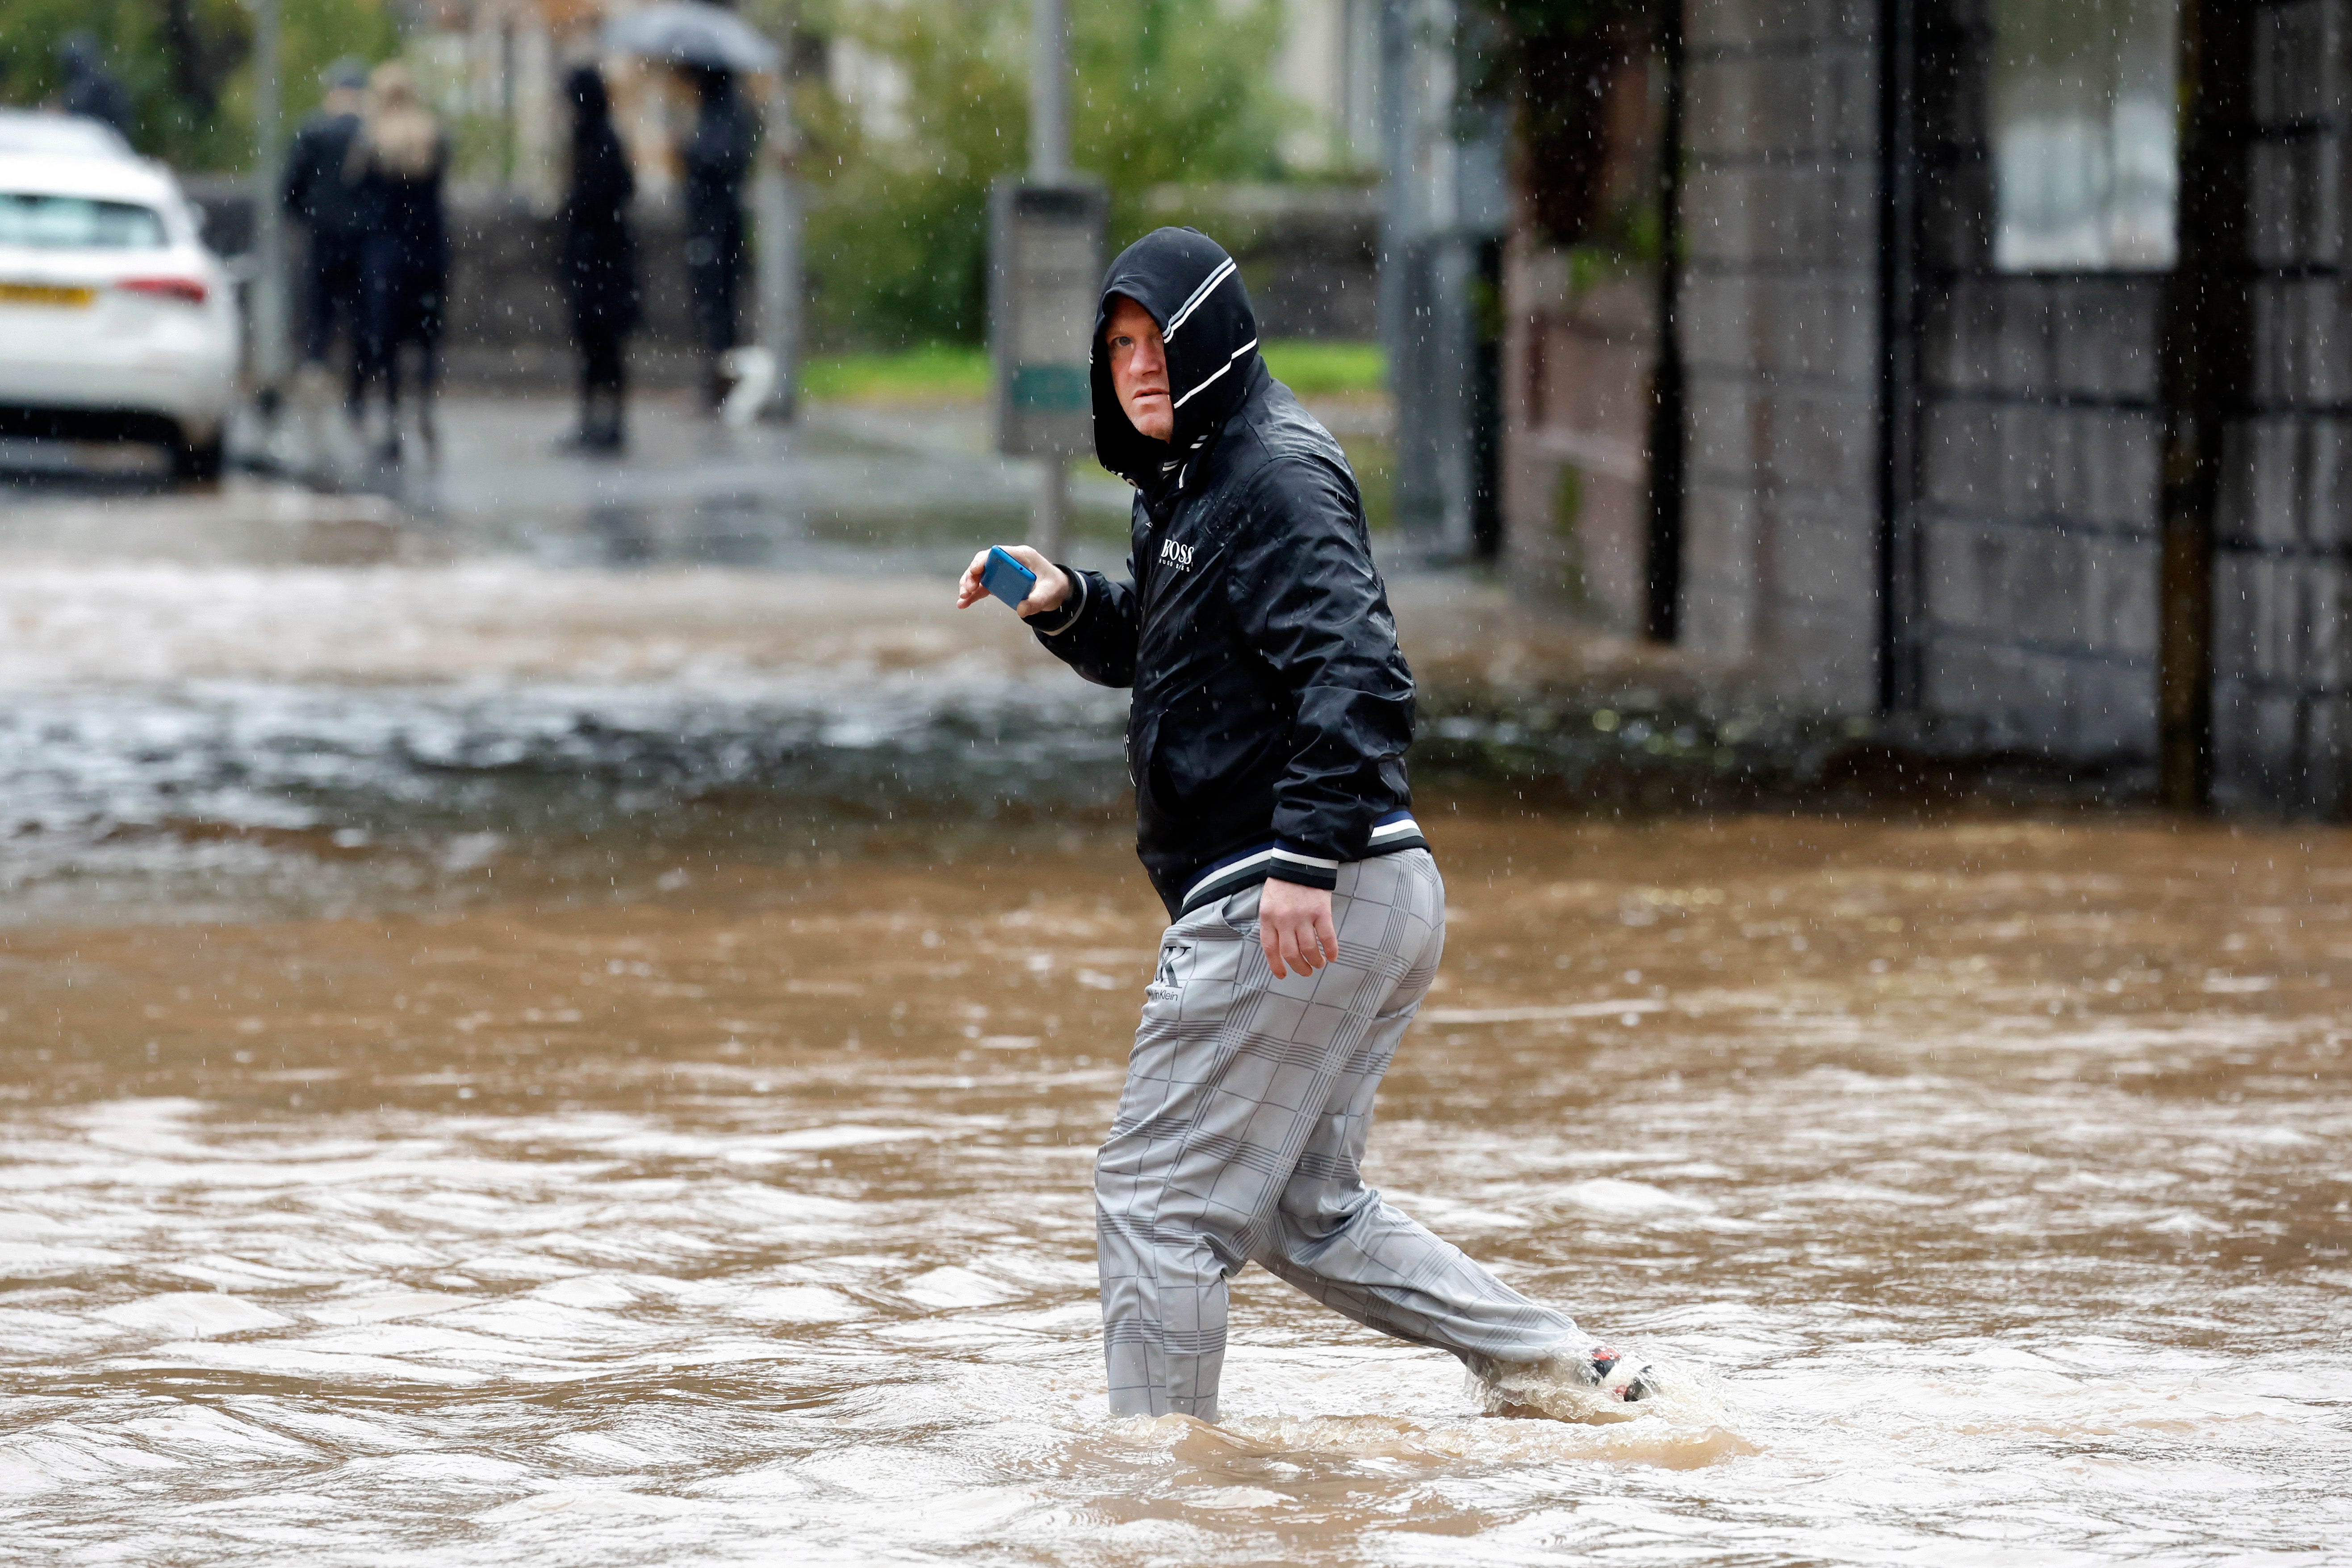 Members of the public struggle with flooding as torrential rain continues